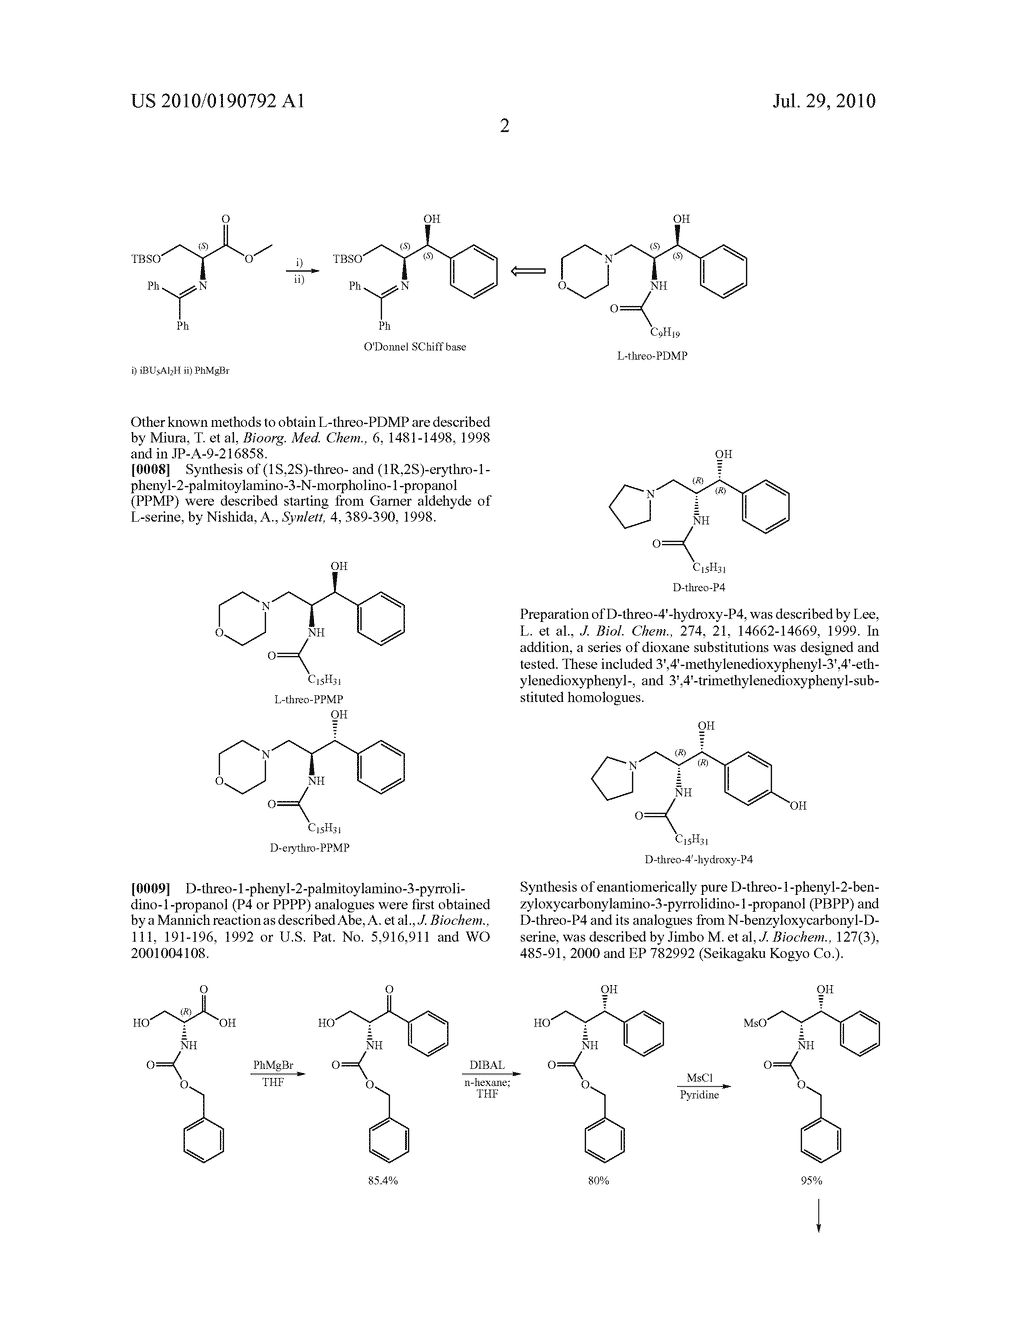 METHODS FOR TREATING COGNITIVE DISORDERS USING 1-BENZYL-1-HYDROXY-2,3-DIAMINO-PROPYL AMINES, 3-BENZYL-3-HYDROXY-2-AMINO-PROPIONIC ACID AMIDES AND RELATED COMPOUNDS - diagram, schematic, and image 04